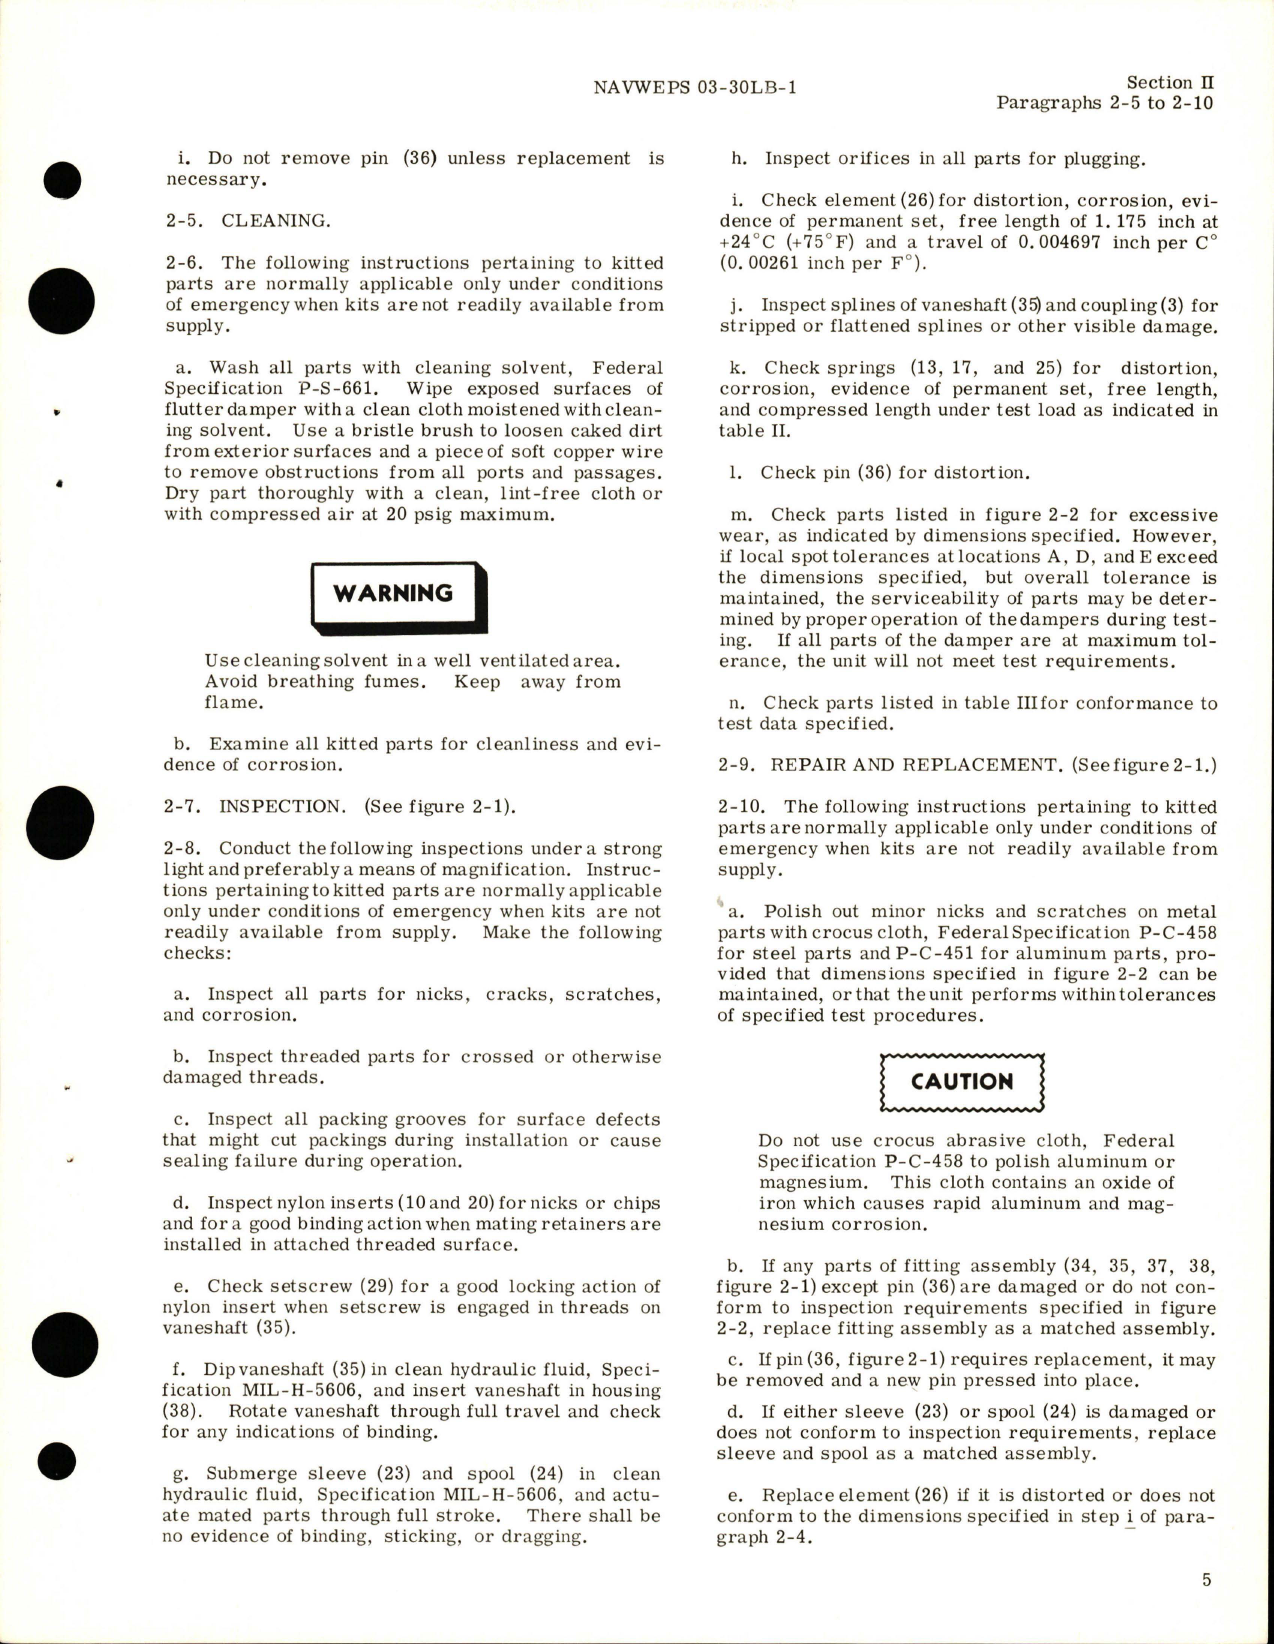 Sample page 9 from AirCorps Library document: Overhaul Instructions for Flutter Dampers - Parts 100721A, 100721A-1, 100721A-3, 100723A, and 100723A-1